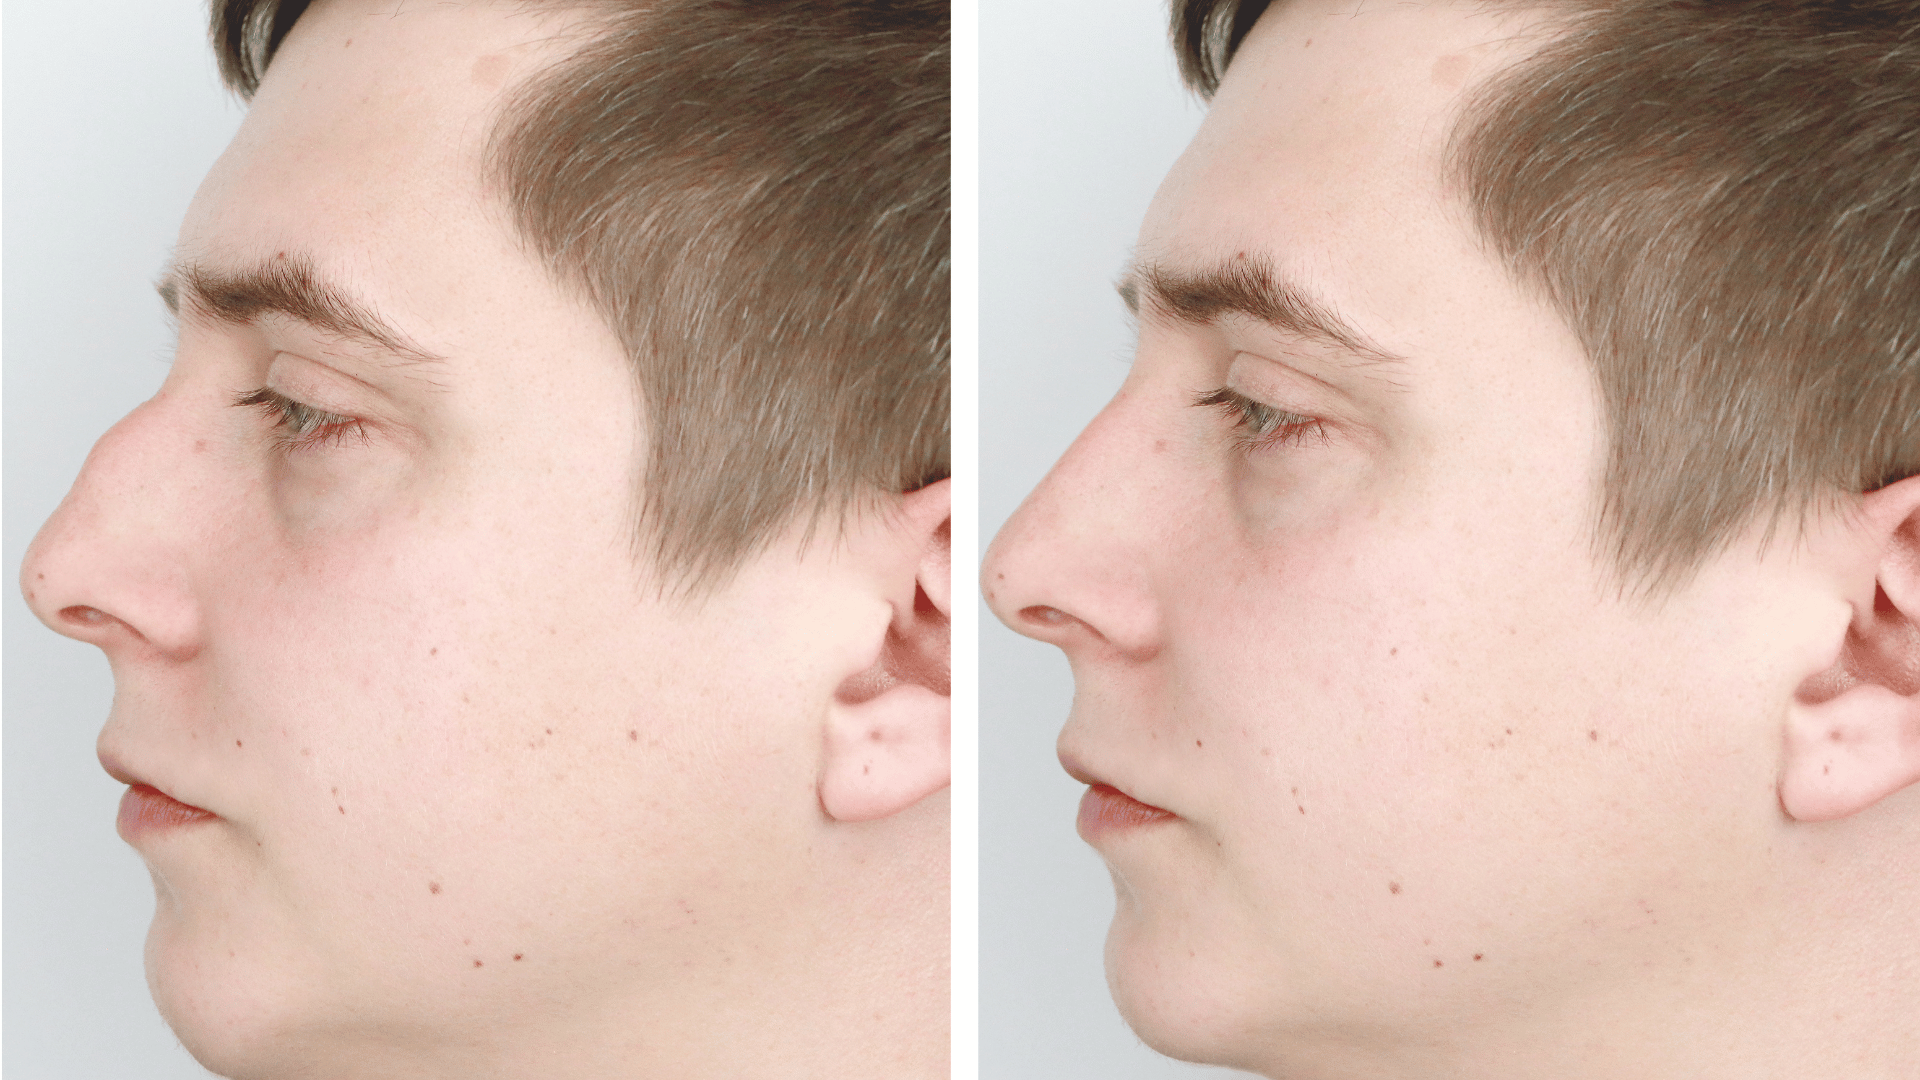 Understanding Male Rhinoplasty: Everything You Need to Know